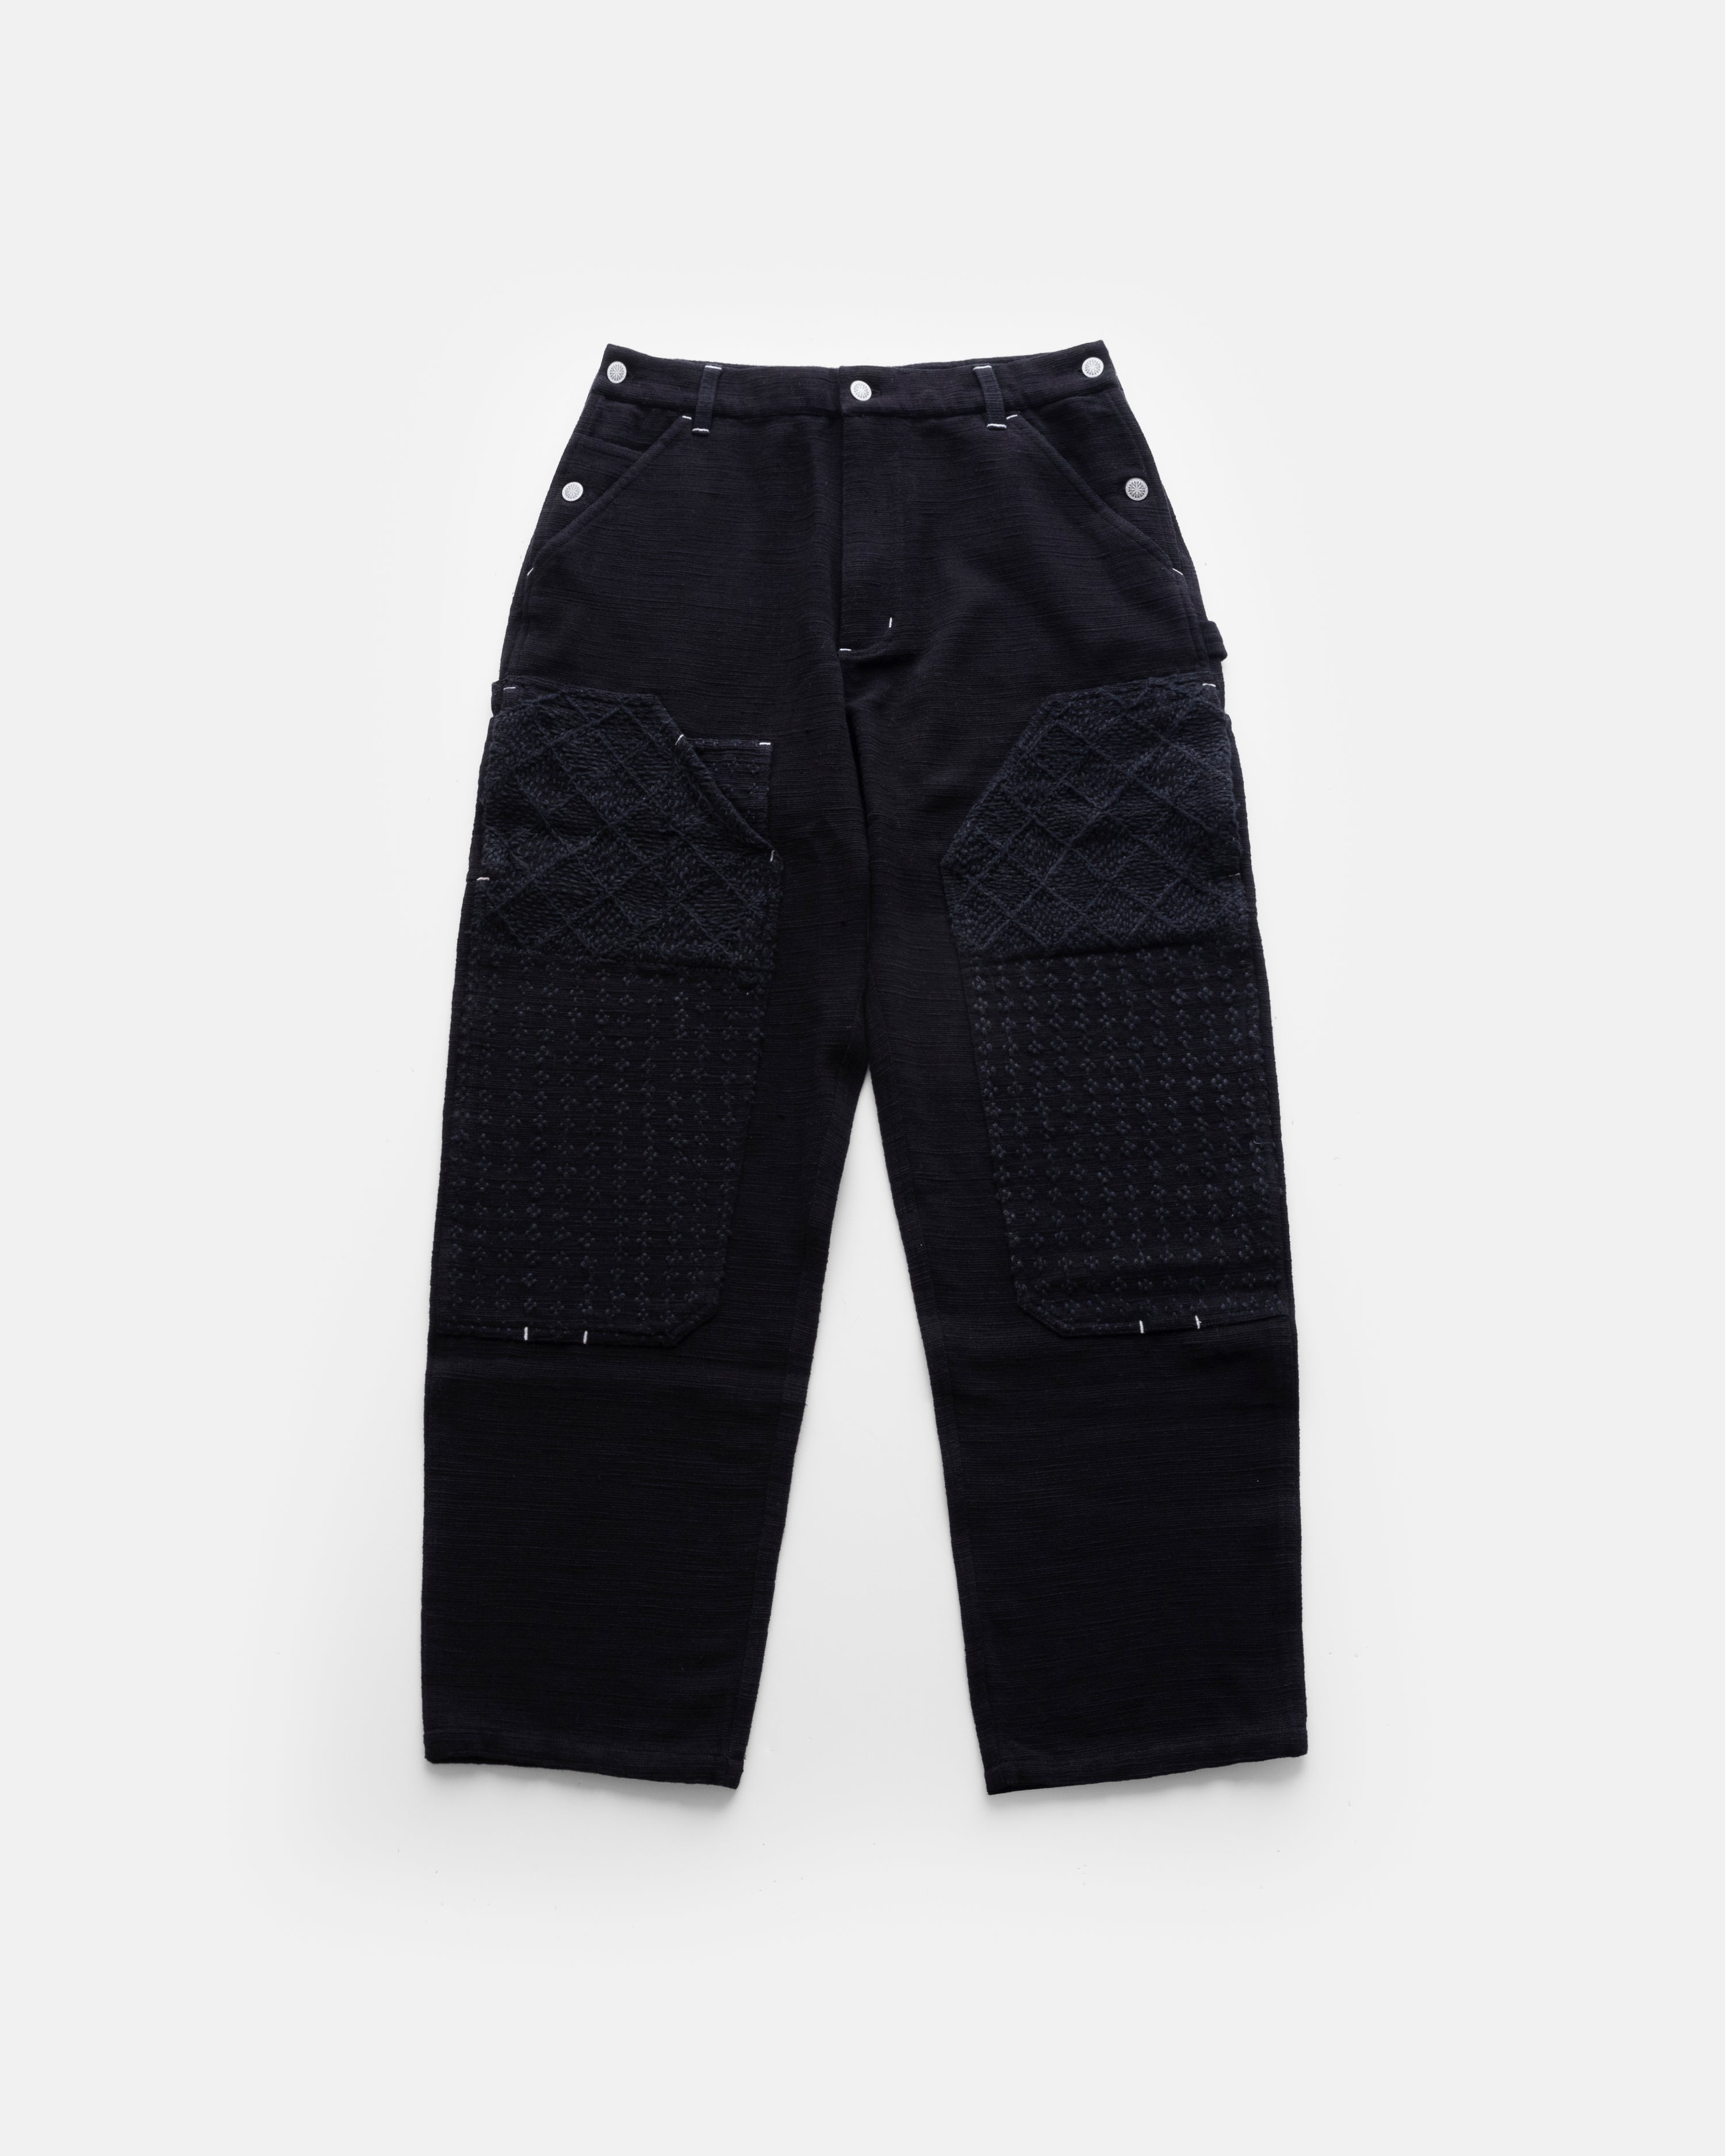 ELI HAND-EMBROIDERED DOUBLE KNEE WORK PANT - BLACK SUMMERWEIGHT KHADI DUCK CANVAS